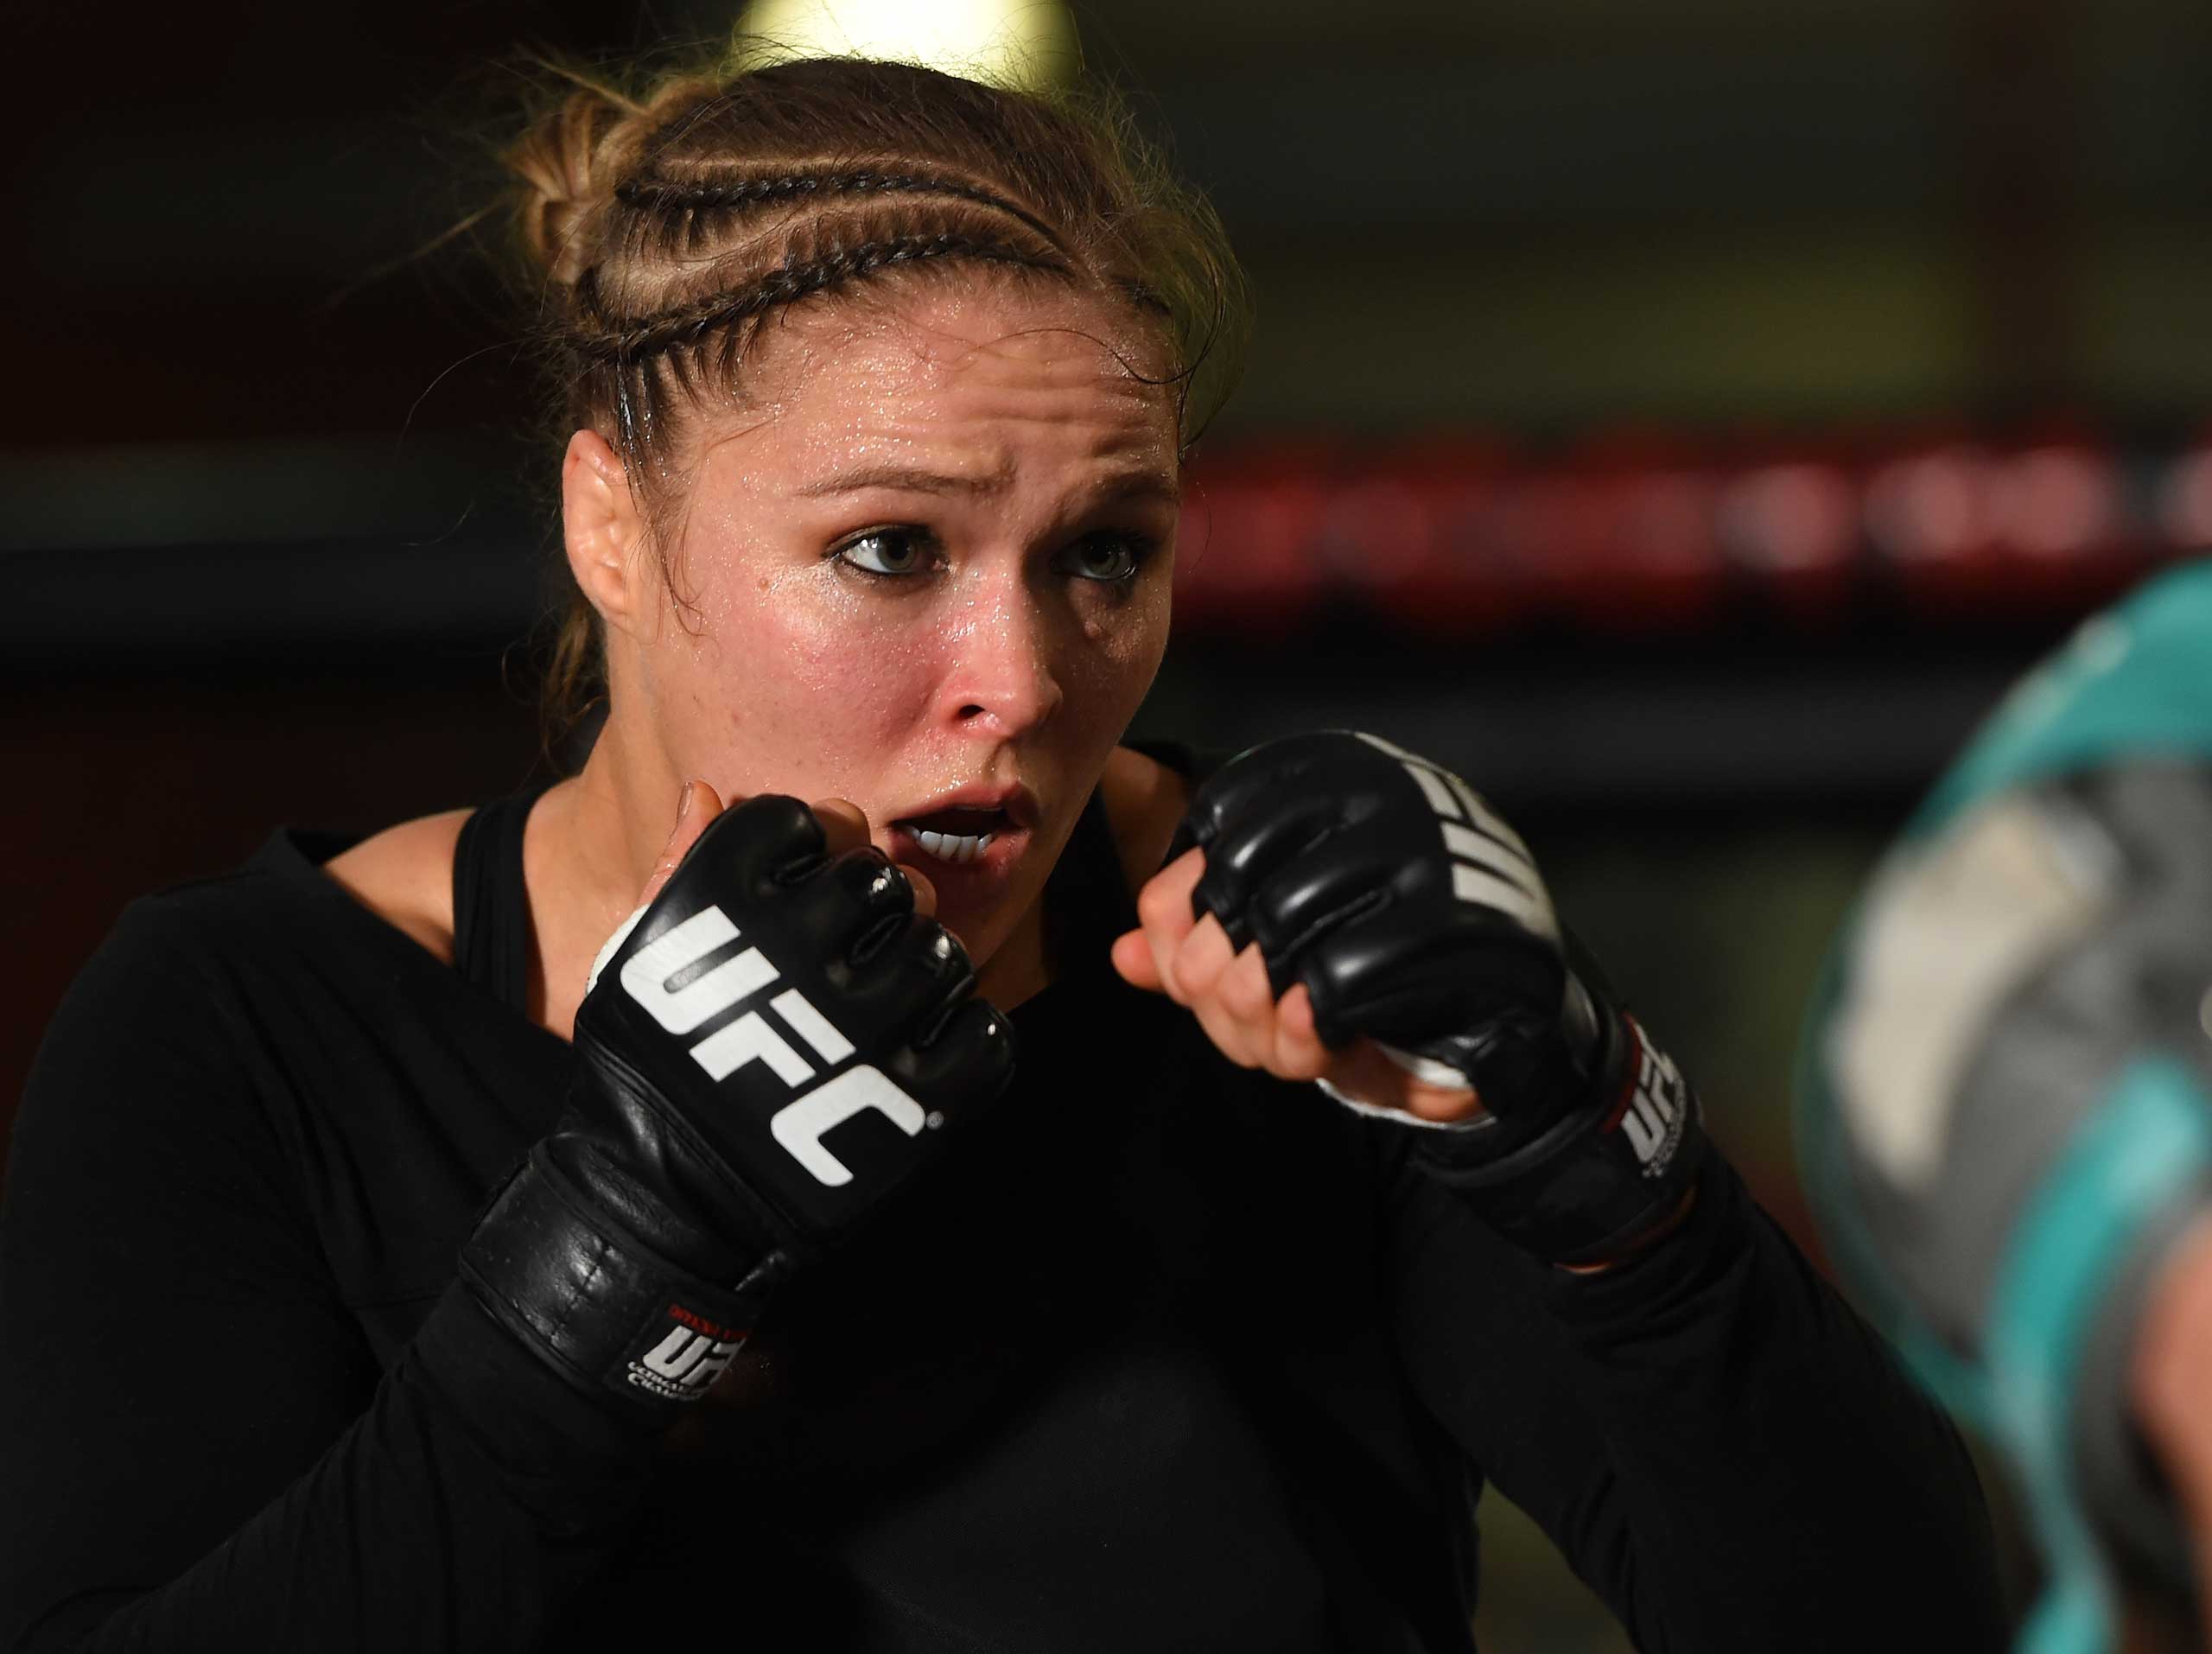 UFC women's bantamweight champion Ronda Rousey holds an open training session for fans and media at the UFC Gym in Torrance, Calif. on Feb. 24, 2015. (Josh Hedges—Zuffa/Getty Images)